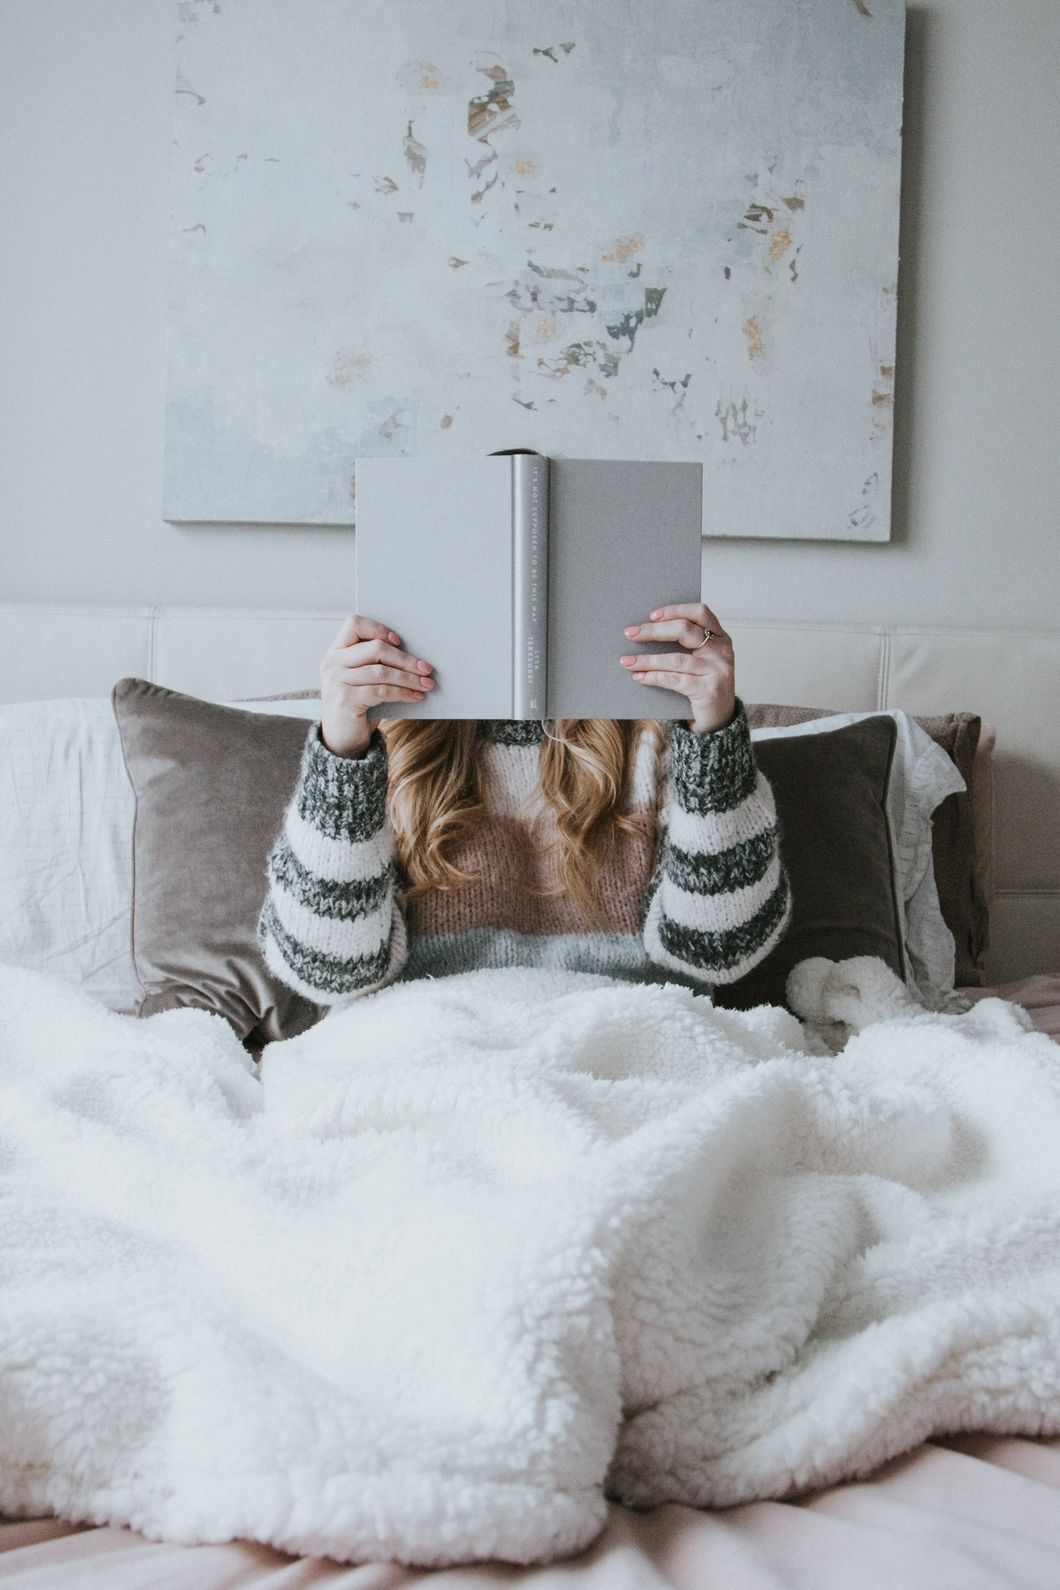 4 Ways Reading Can Help Your Mental Health, According To An Avid Bookworm